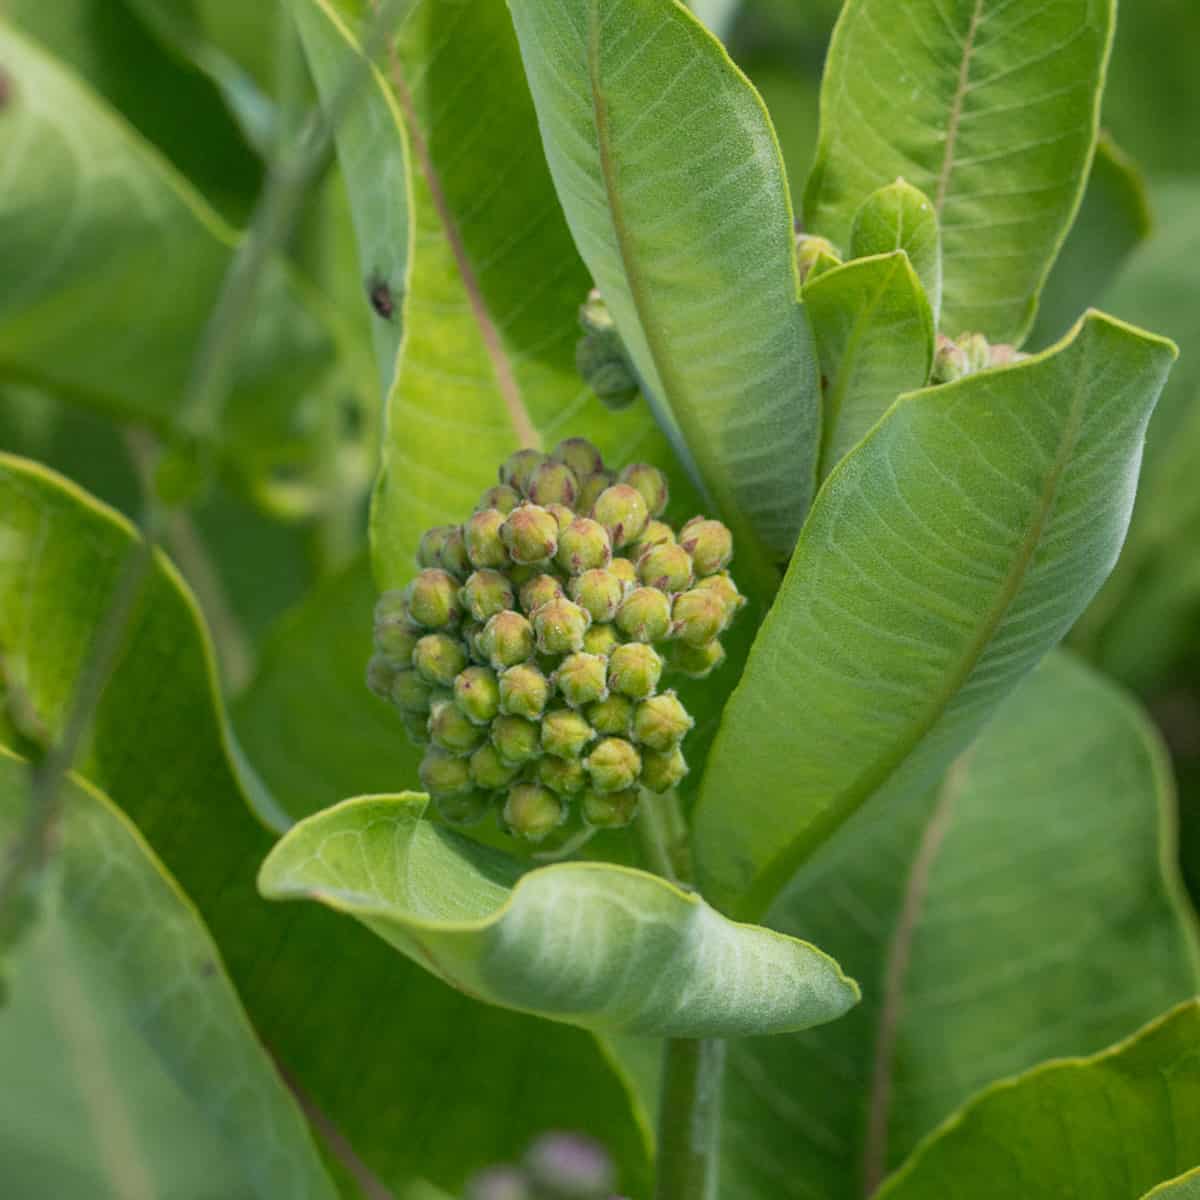 milkweed buds on the plant in the summer 